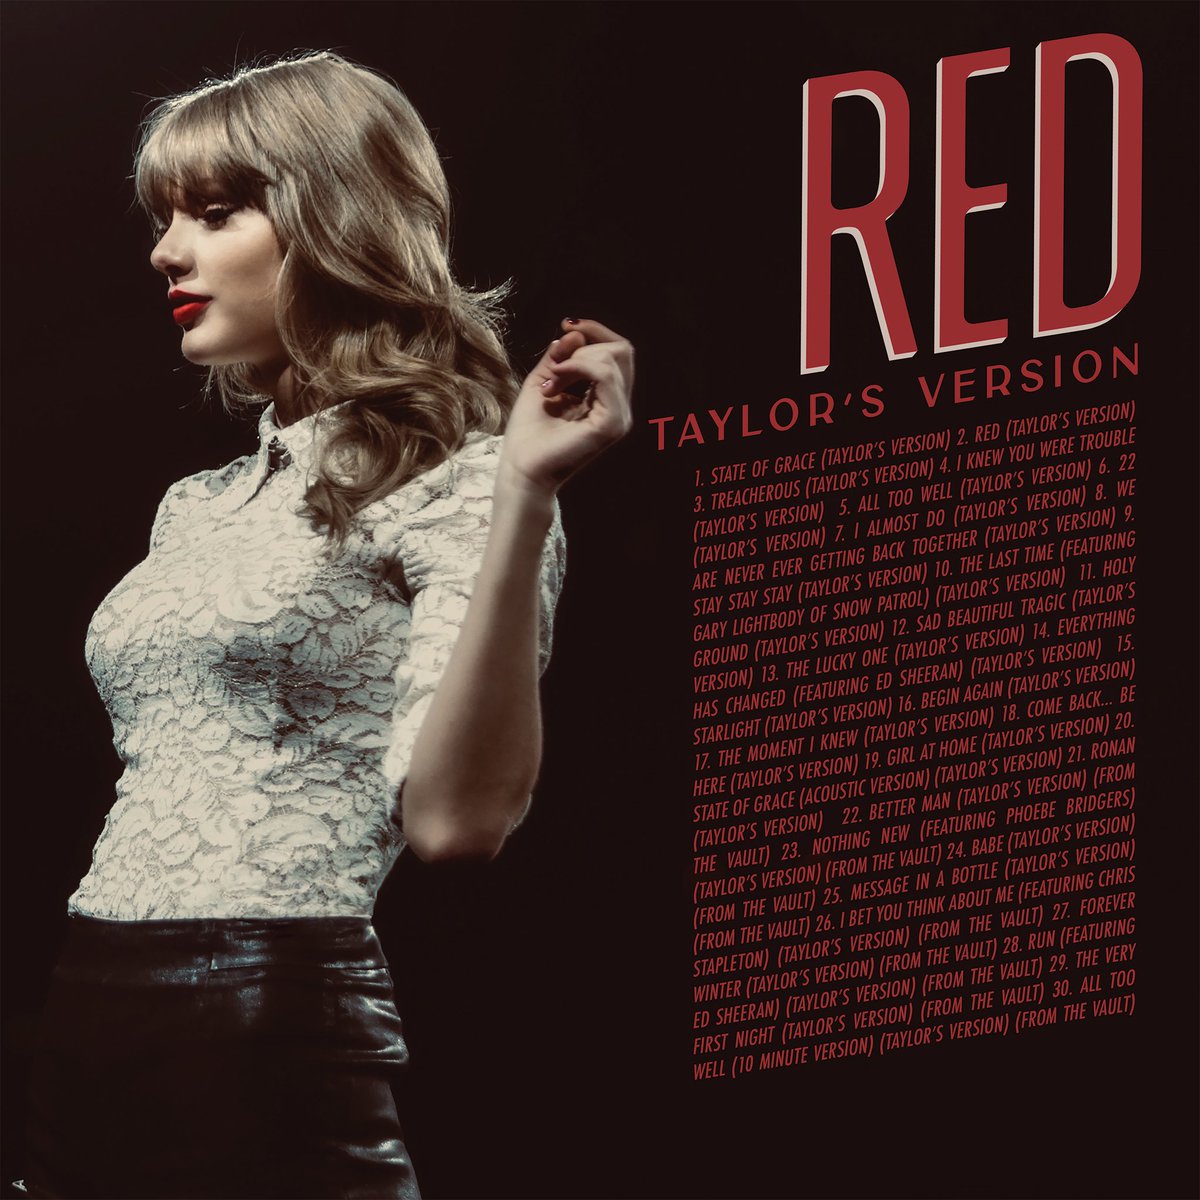 📈| #RedTaylorsVersion remains stable in the Billboard 200 at #2 (=) with 80k units. It's the album 4th consecutive inside the top 2 of the chart!